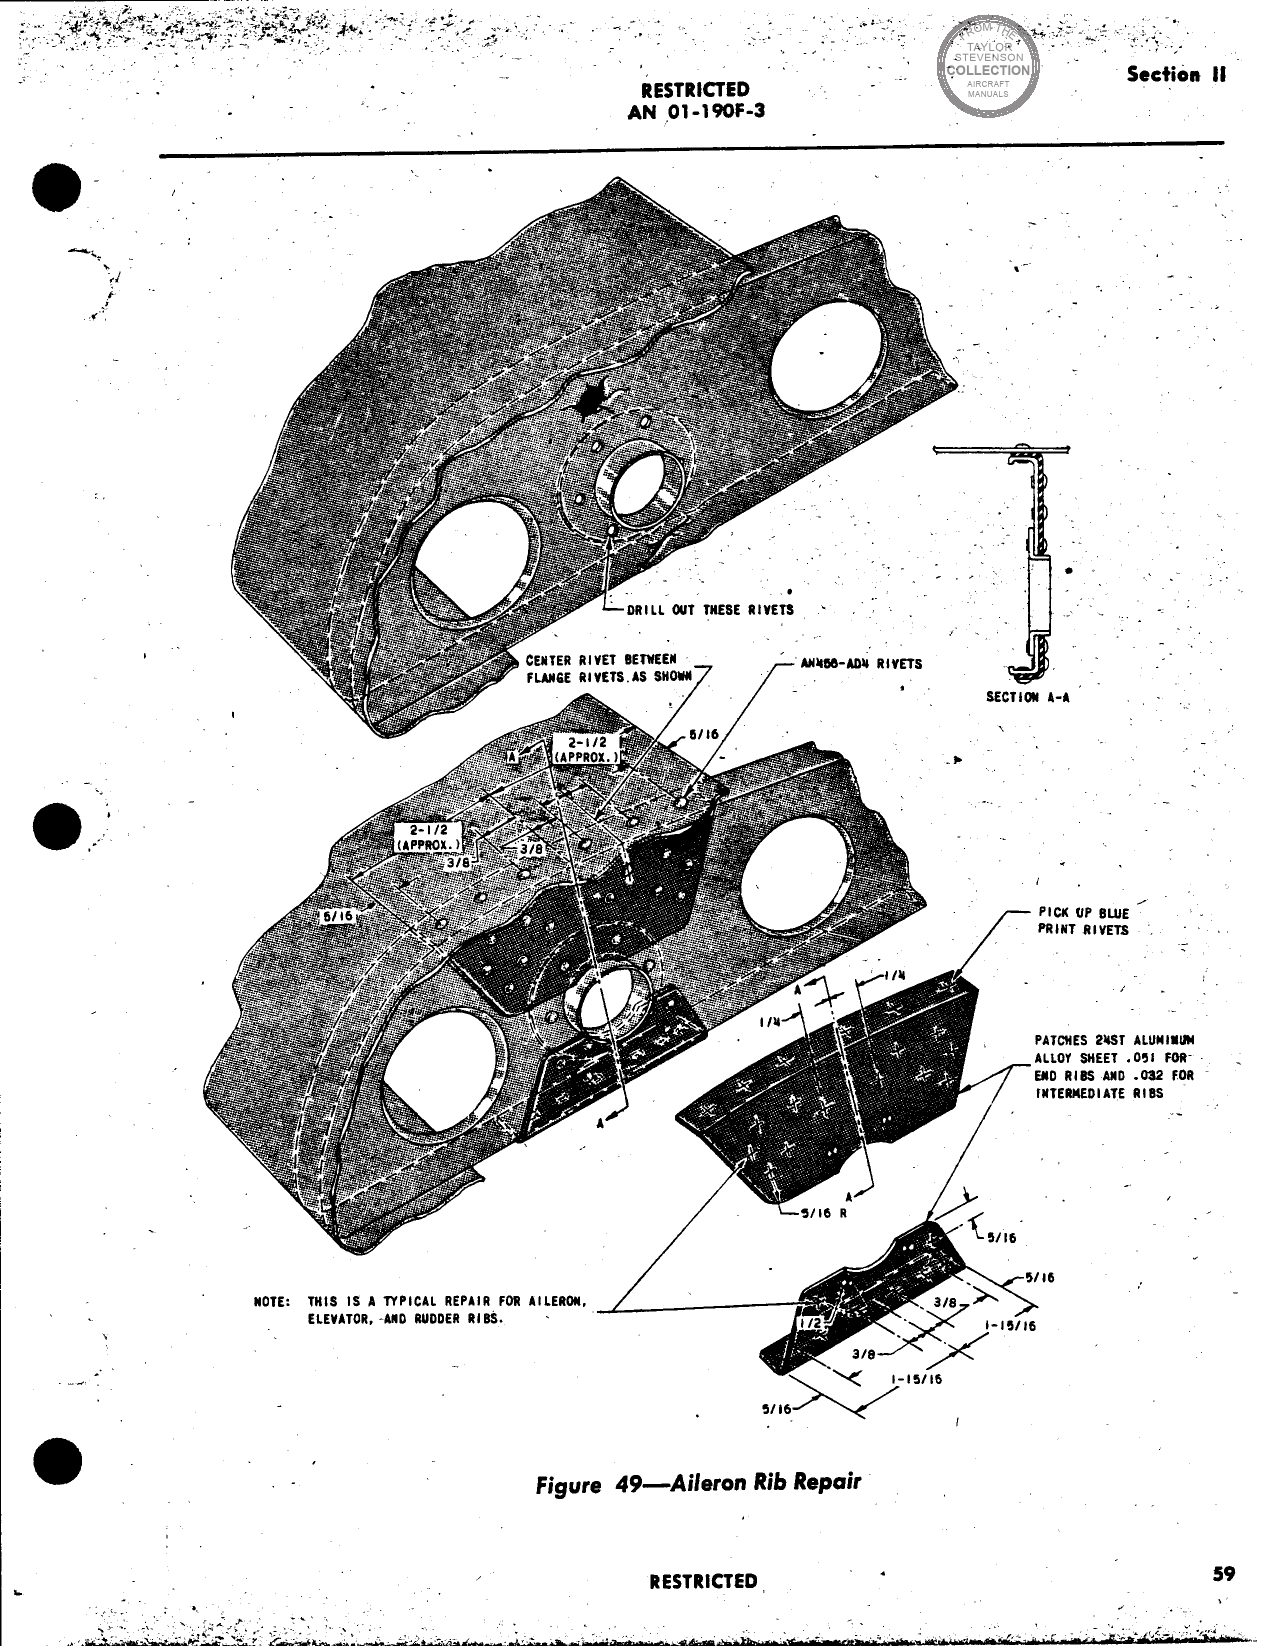 Sample page 69 from AirCorps Library document: Handbook of Instructions for Structural Repair for FM-1 and FM-2 Wildcat